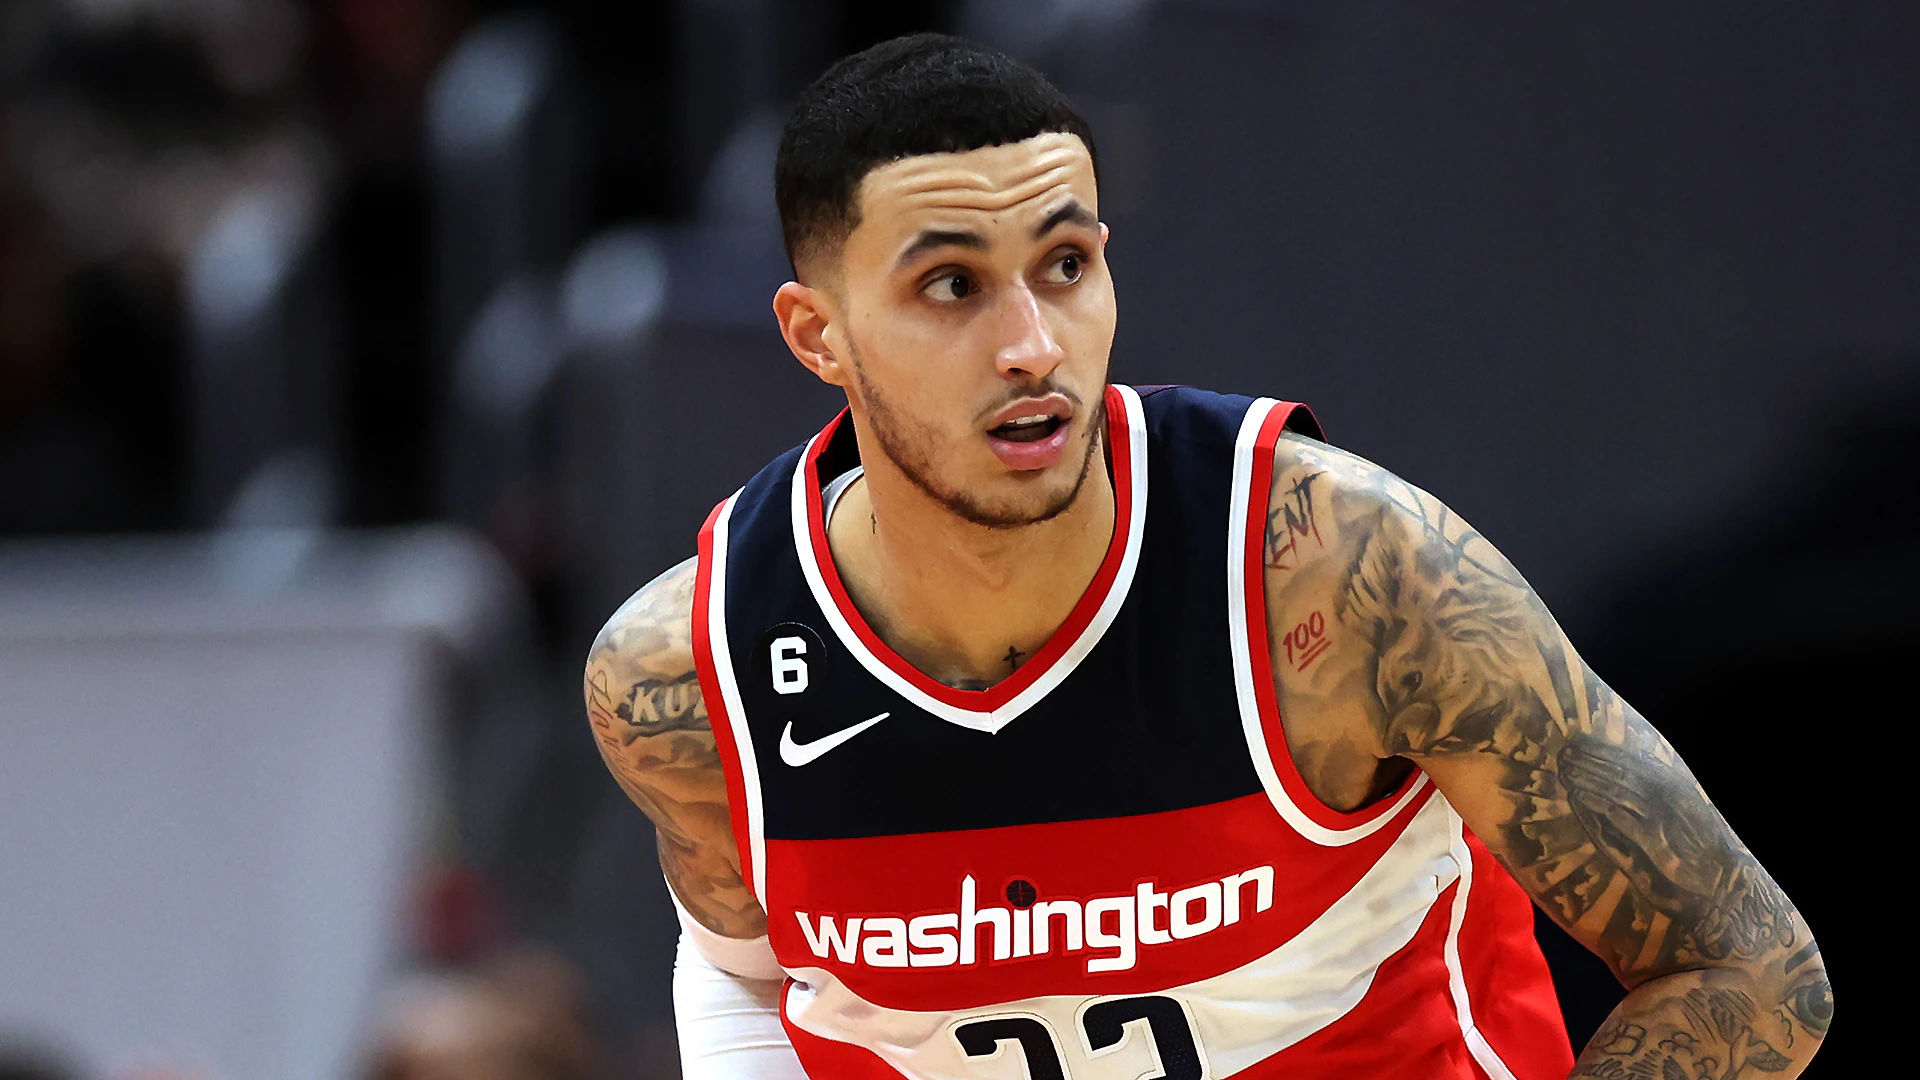 Rising NBA Star Kyle Kuzma in Limelight: The Highly Anticipated Draft Day Fuels Trade Speculation